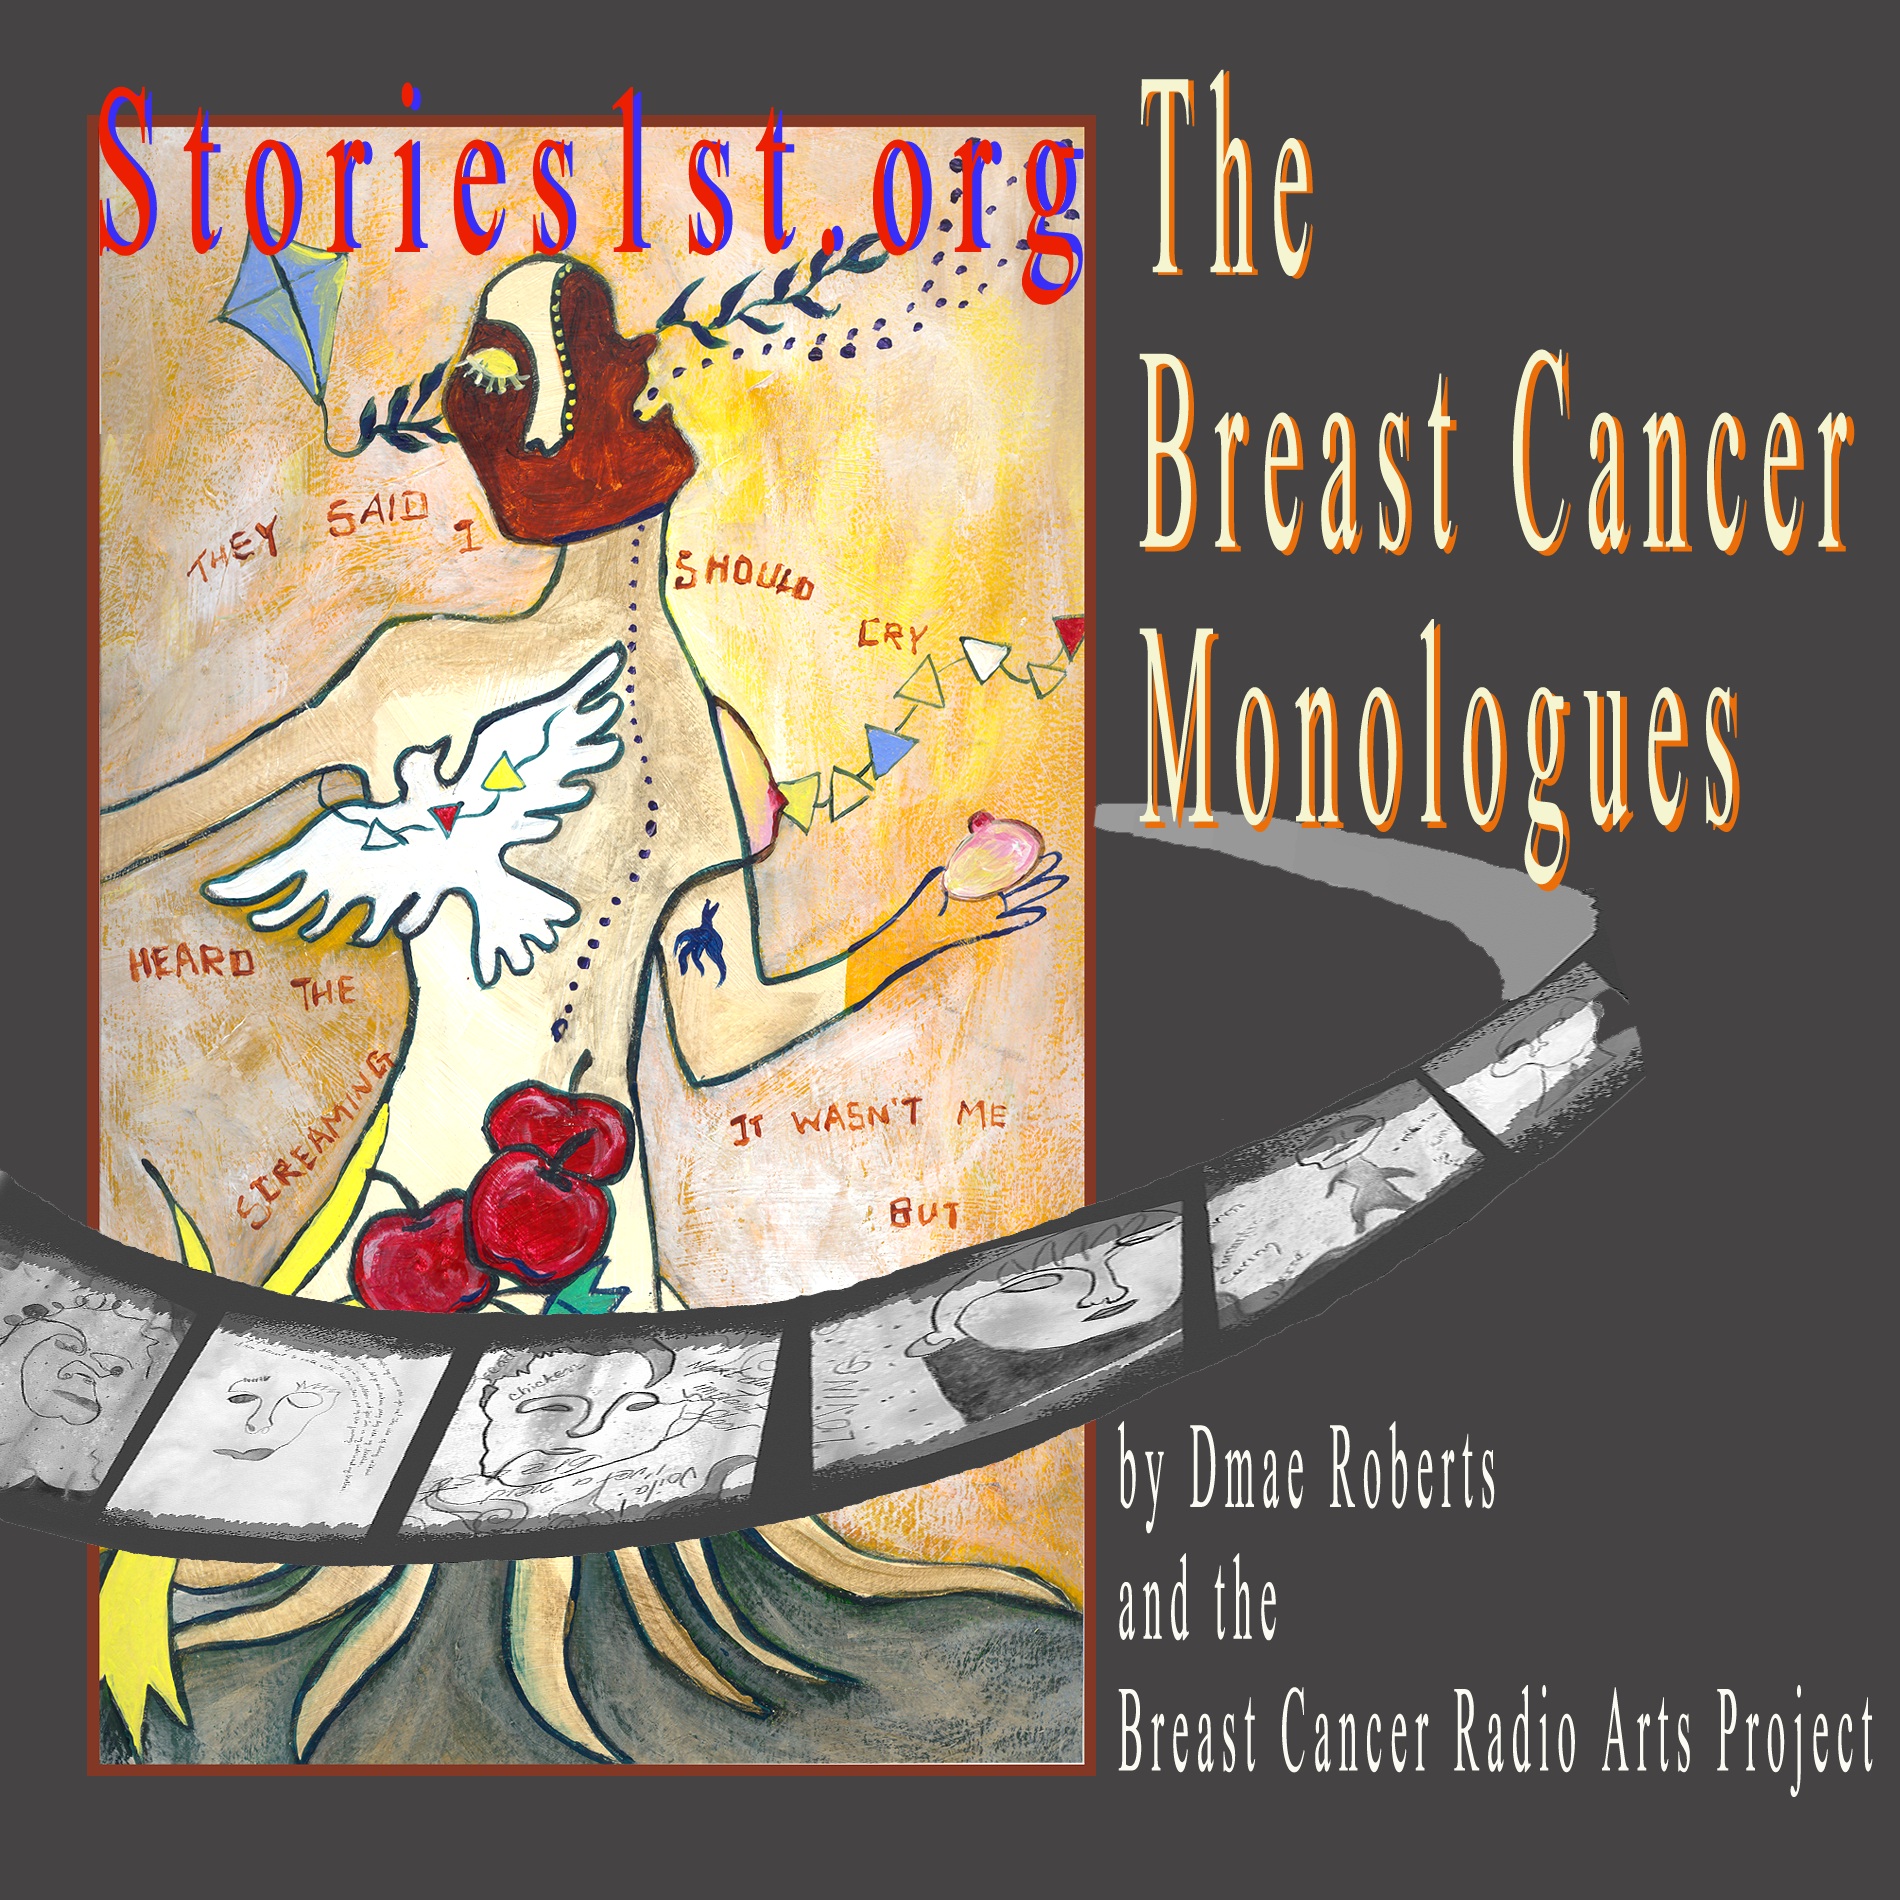 Breast Cancer Monologues